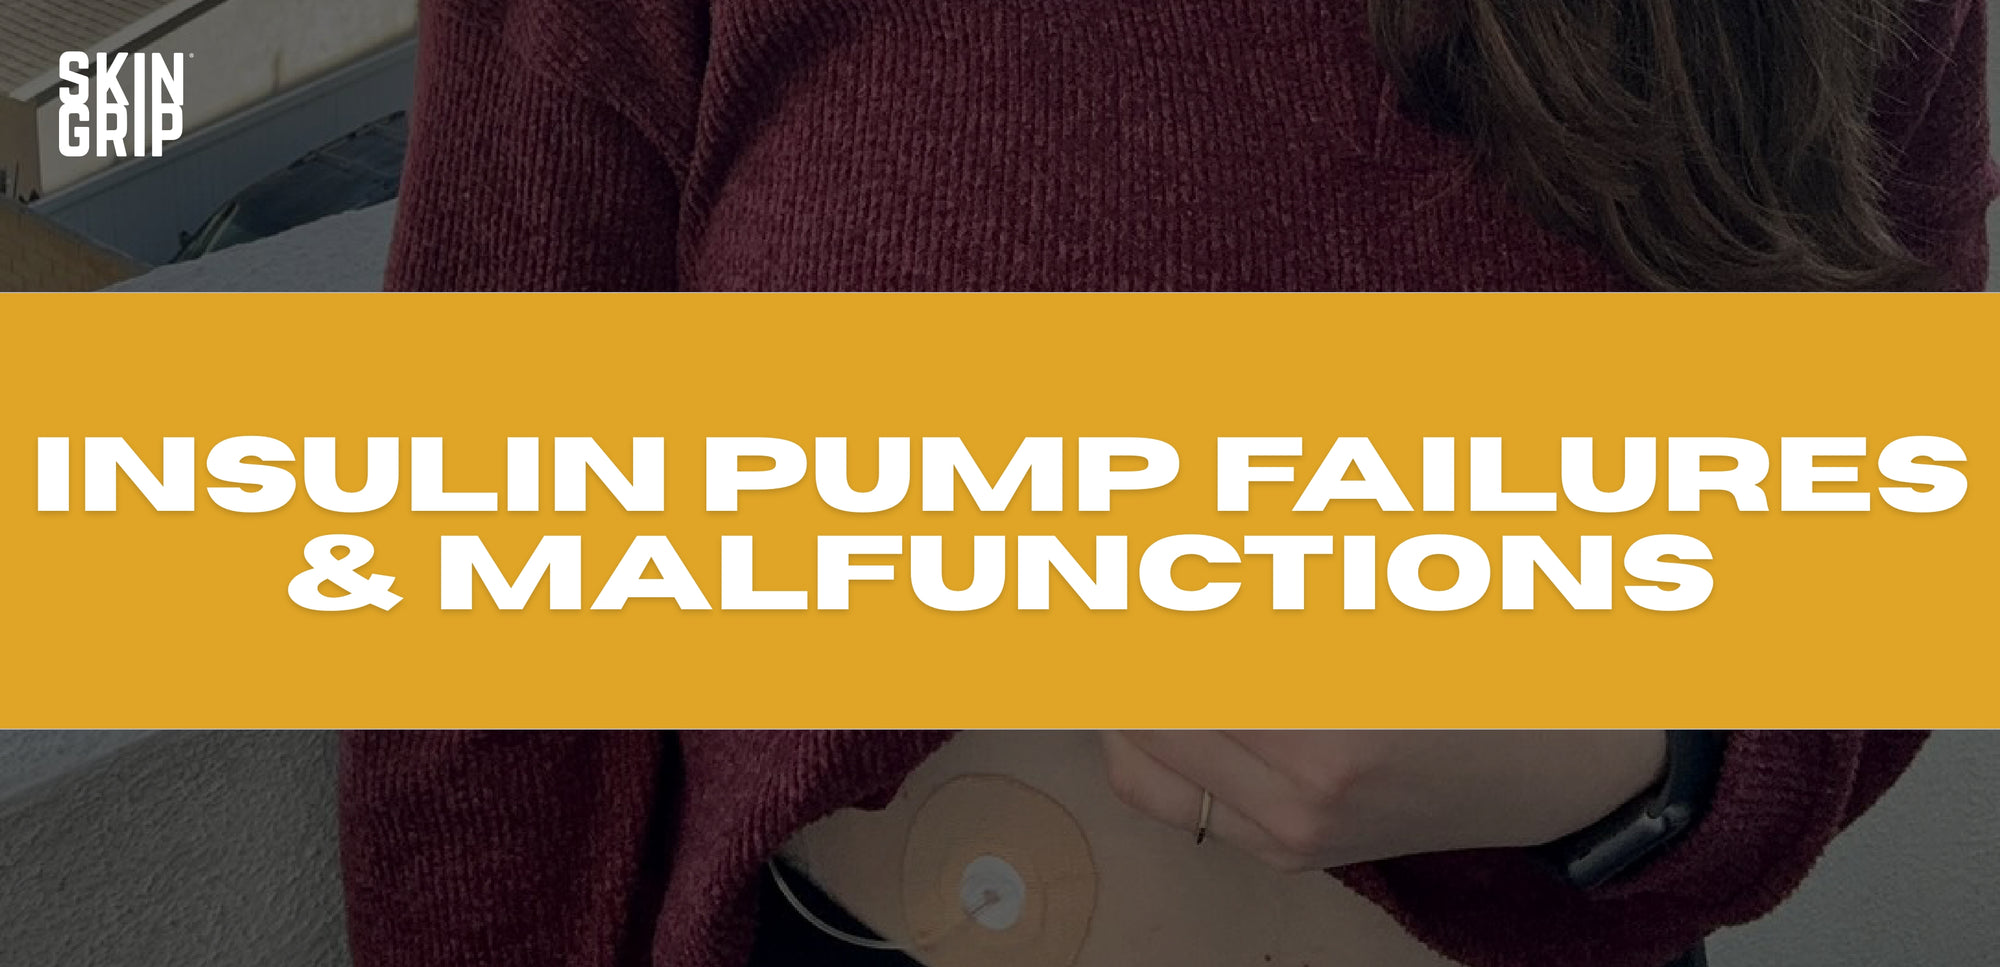 Insulin Pump Failures & Malfunctions: What is an insulin pump backup plan and when should it be used?